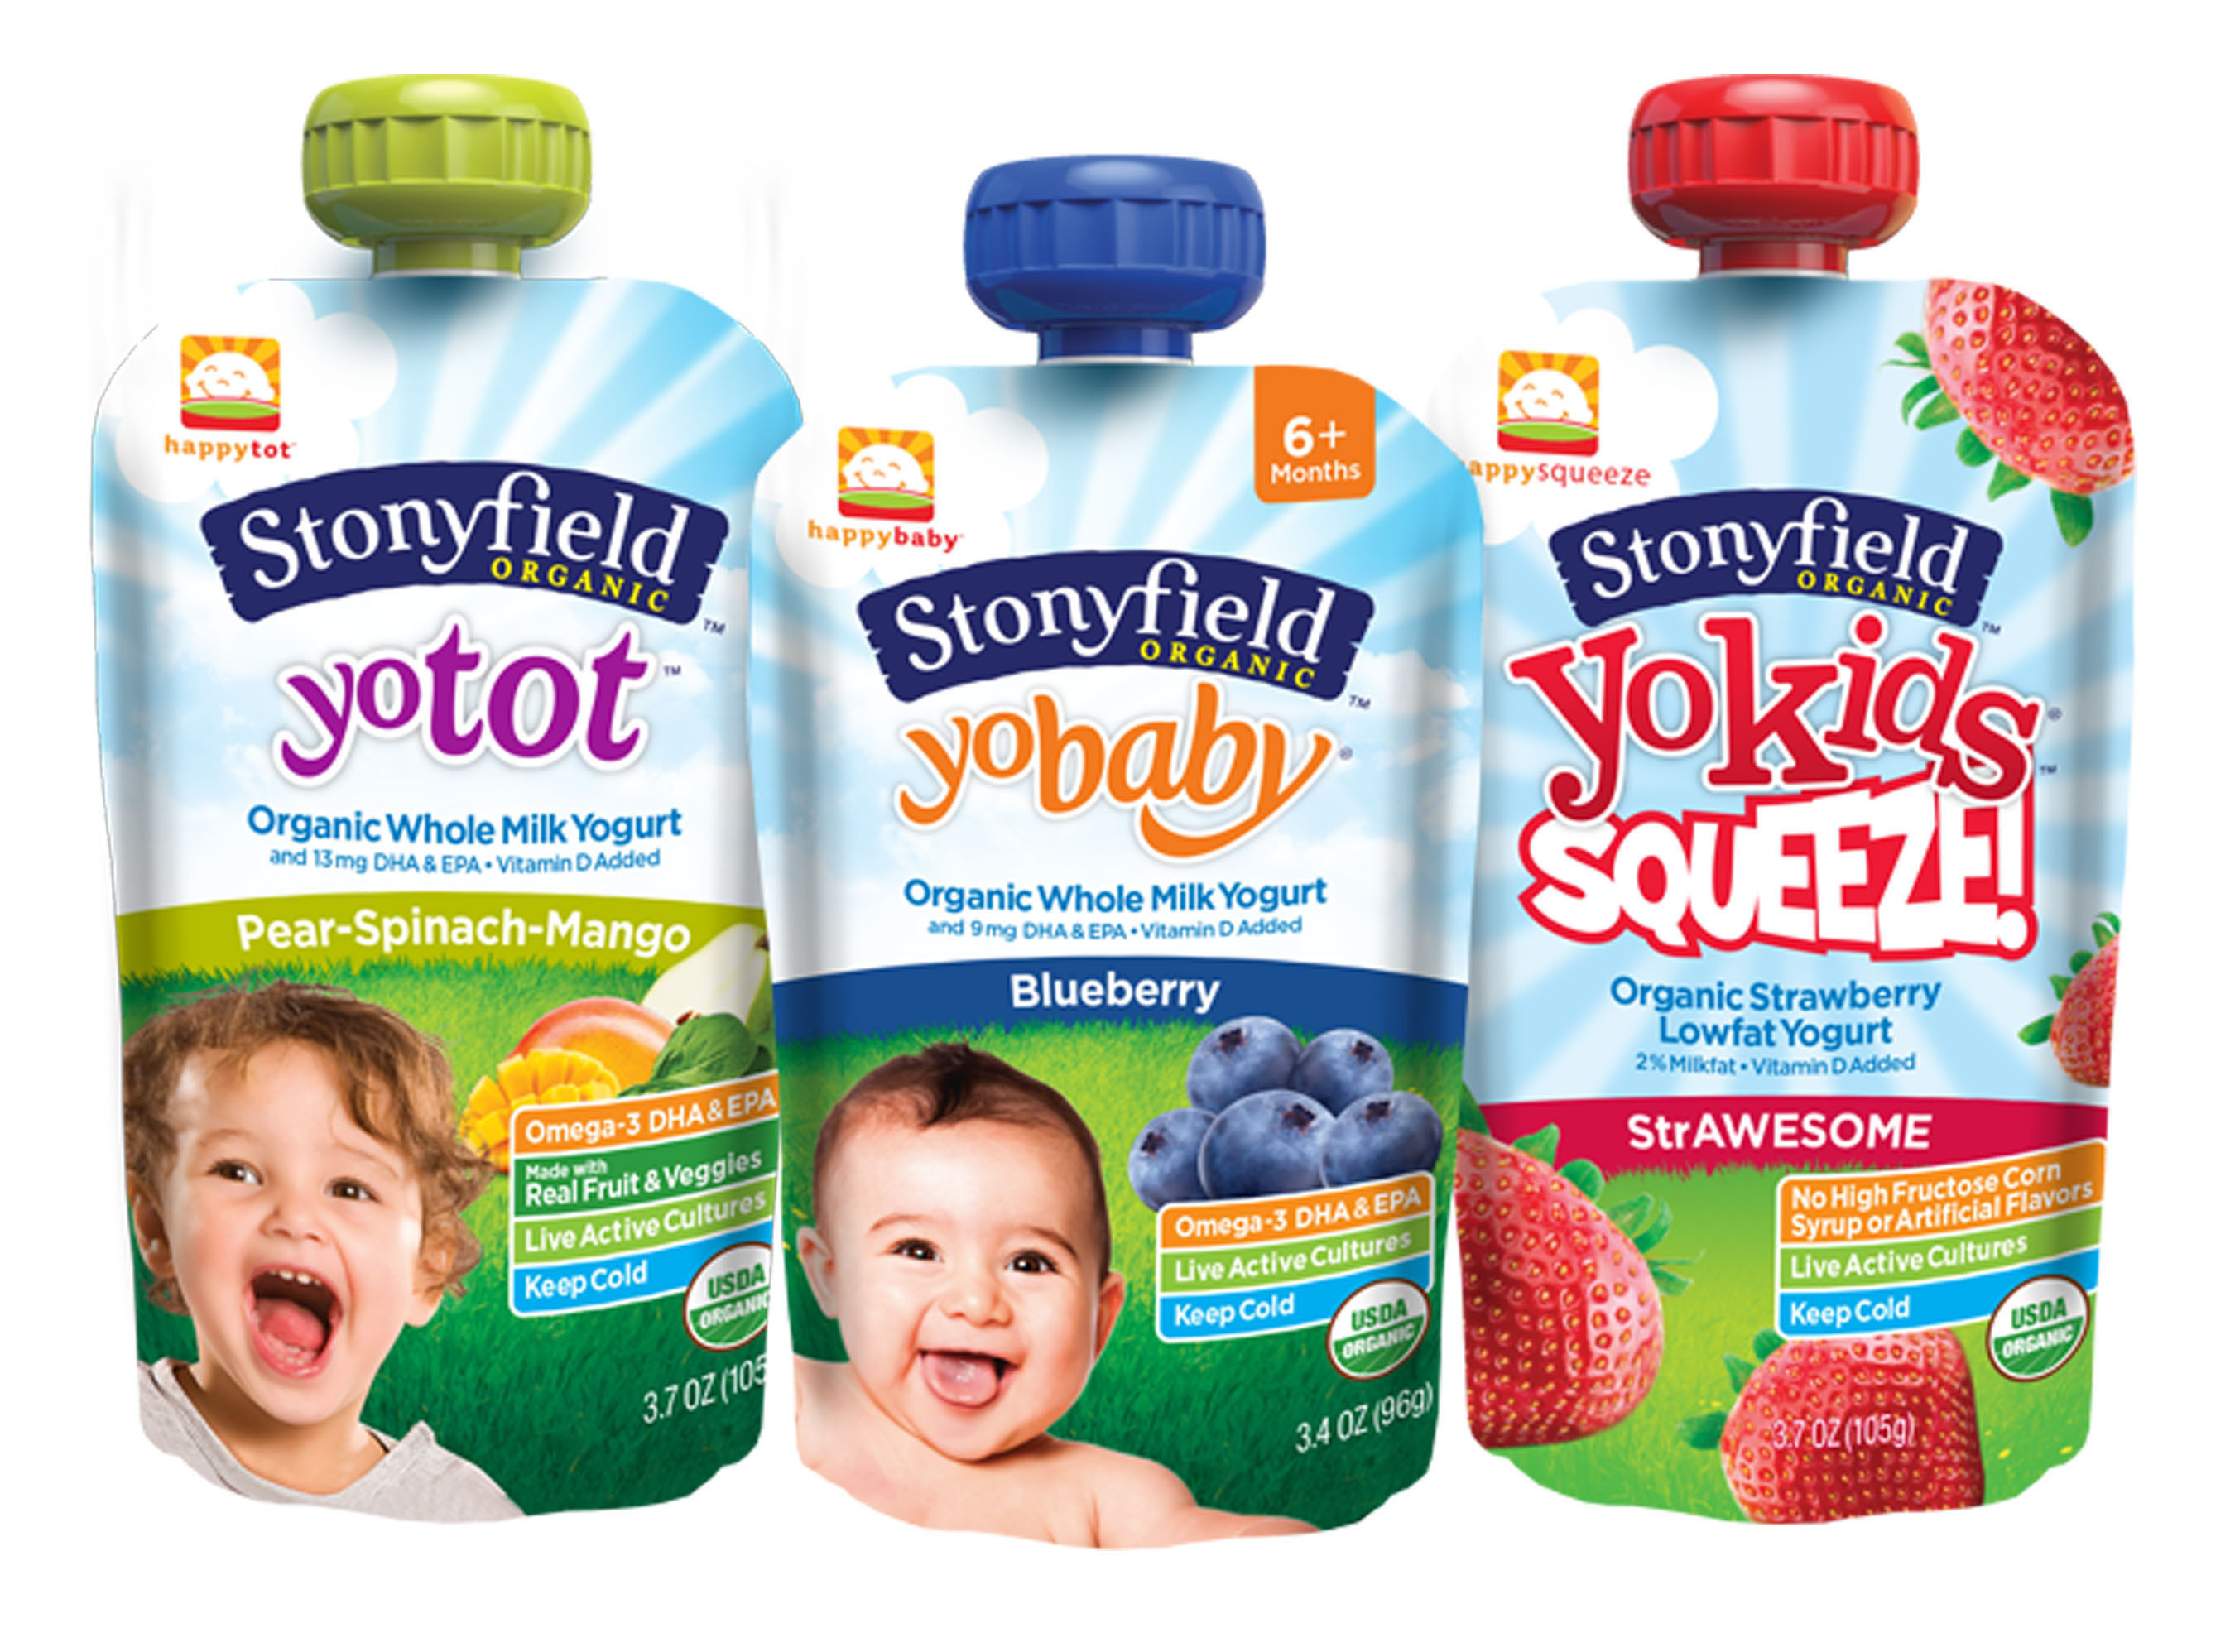 Stonyfield And Happy Family Introduce CoBranded Line Of Yogurt Pouches For Babies, Toddlers And